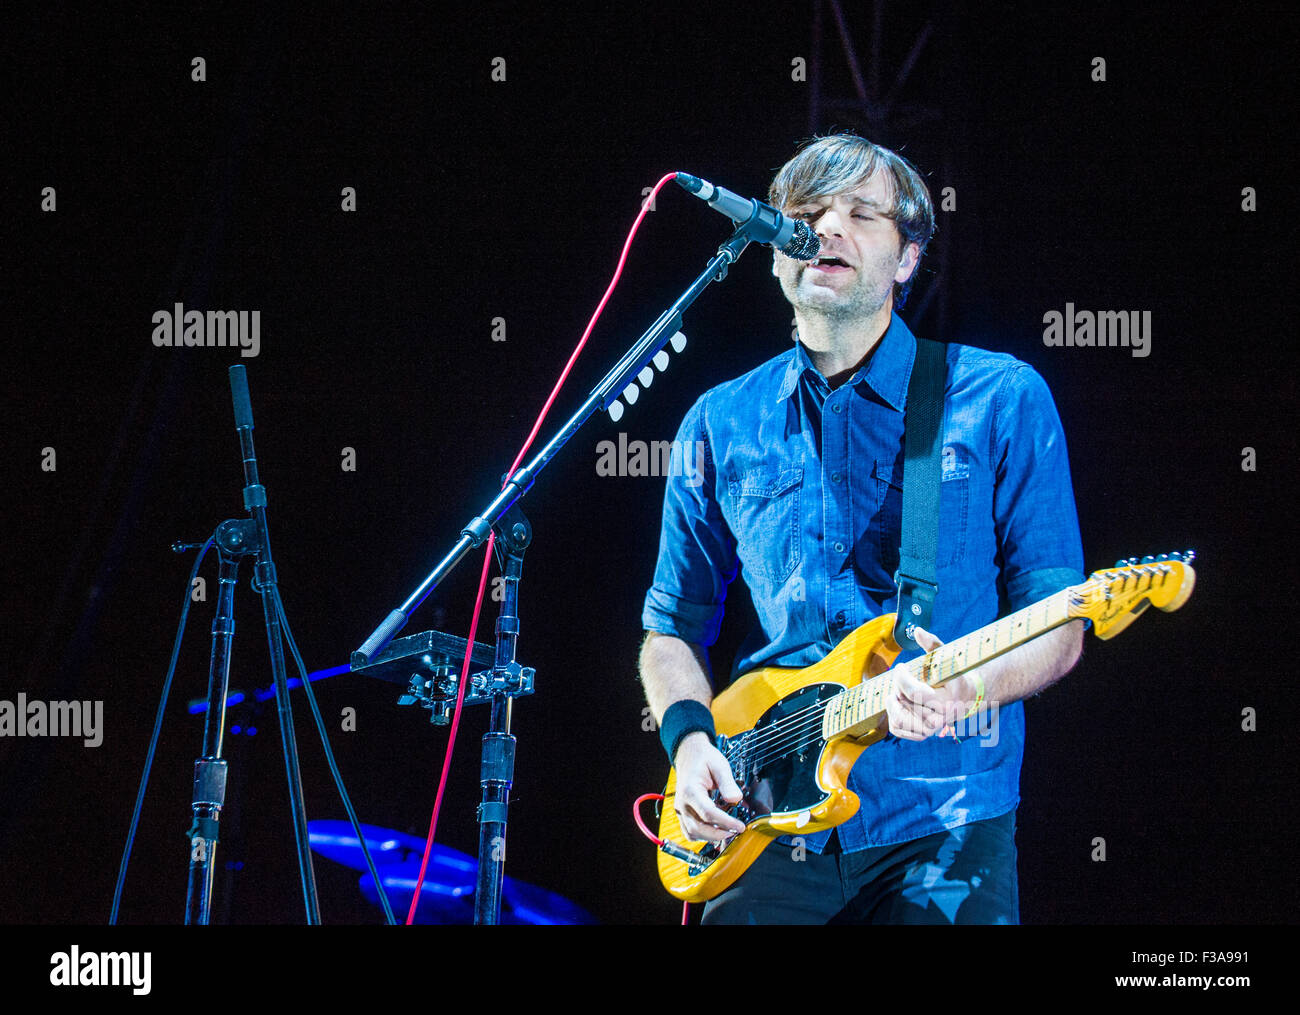 Musician Ben Gibbard of Death Cab for Cutie performs onstage at the 2015 Life Is Beautiful Festival in Las Vegas Stock Photo